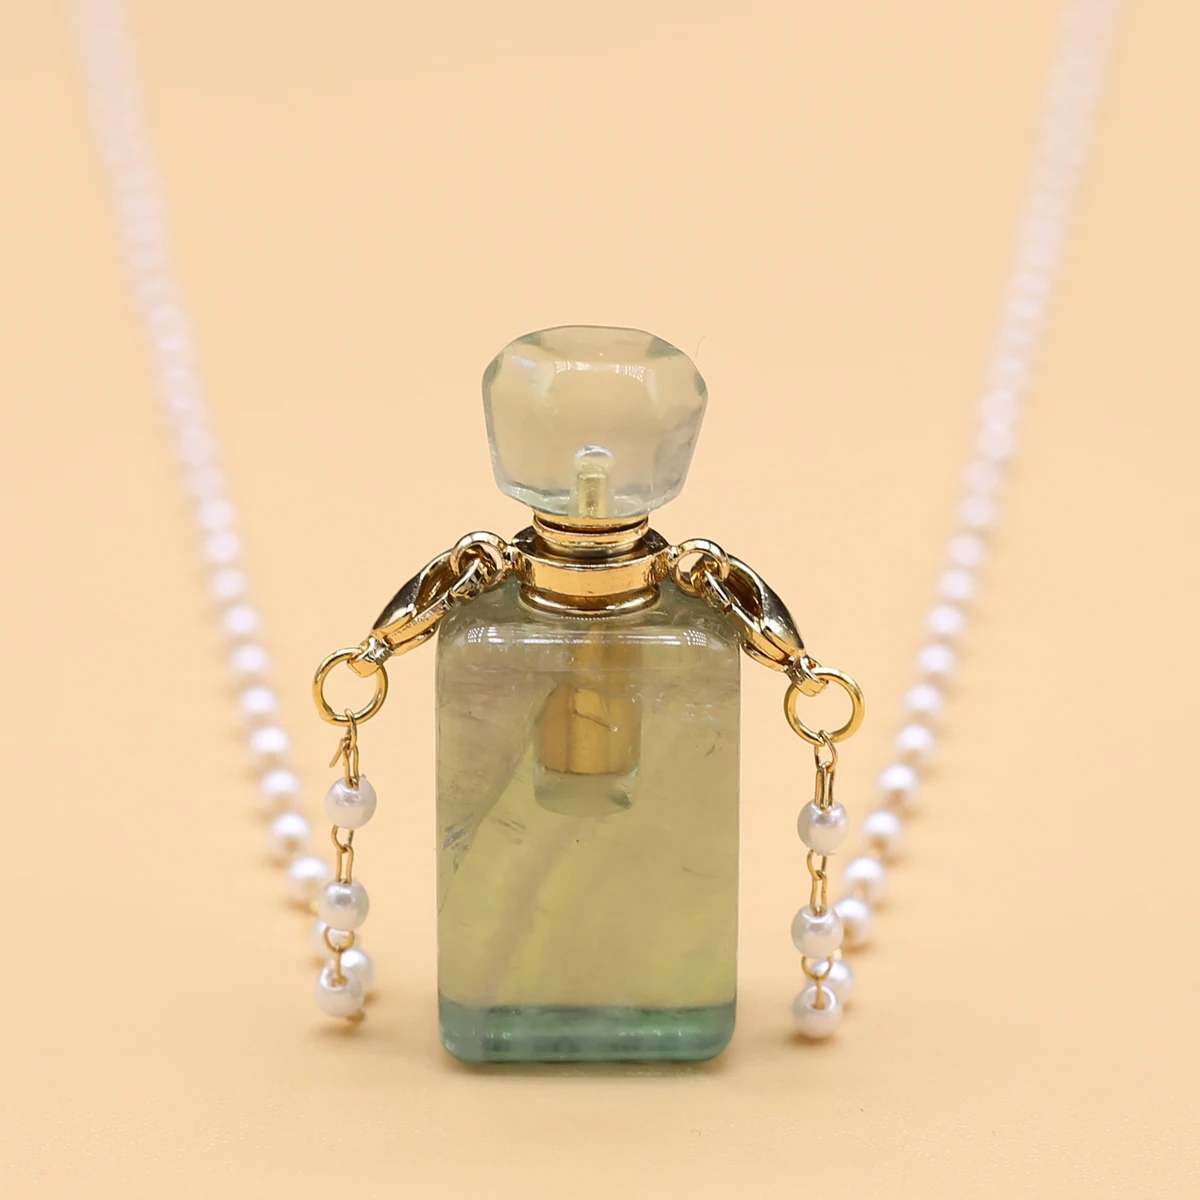 

Natural Stones Fluorite Perfume Bottle Pendant Necklace Charms Pearls Chain Necklaces for Women Jewelry Handmade Crafts 18x34mm